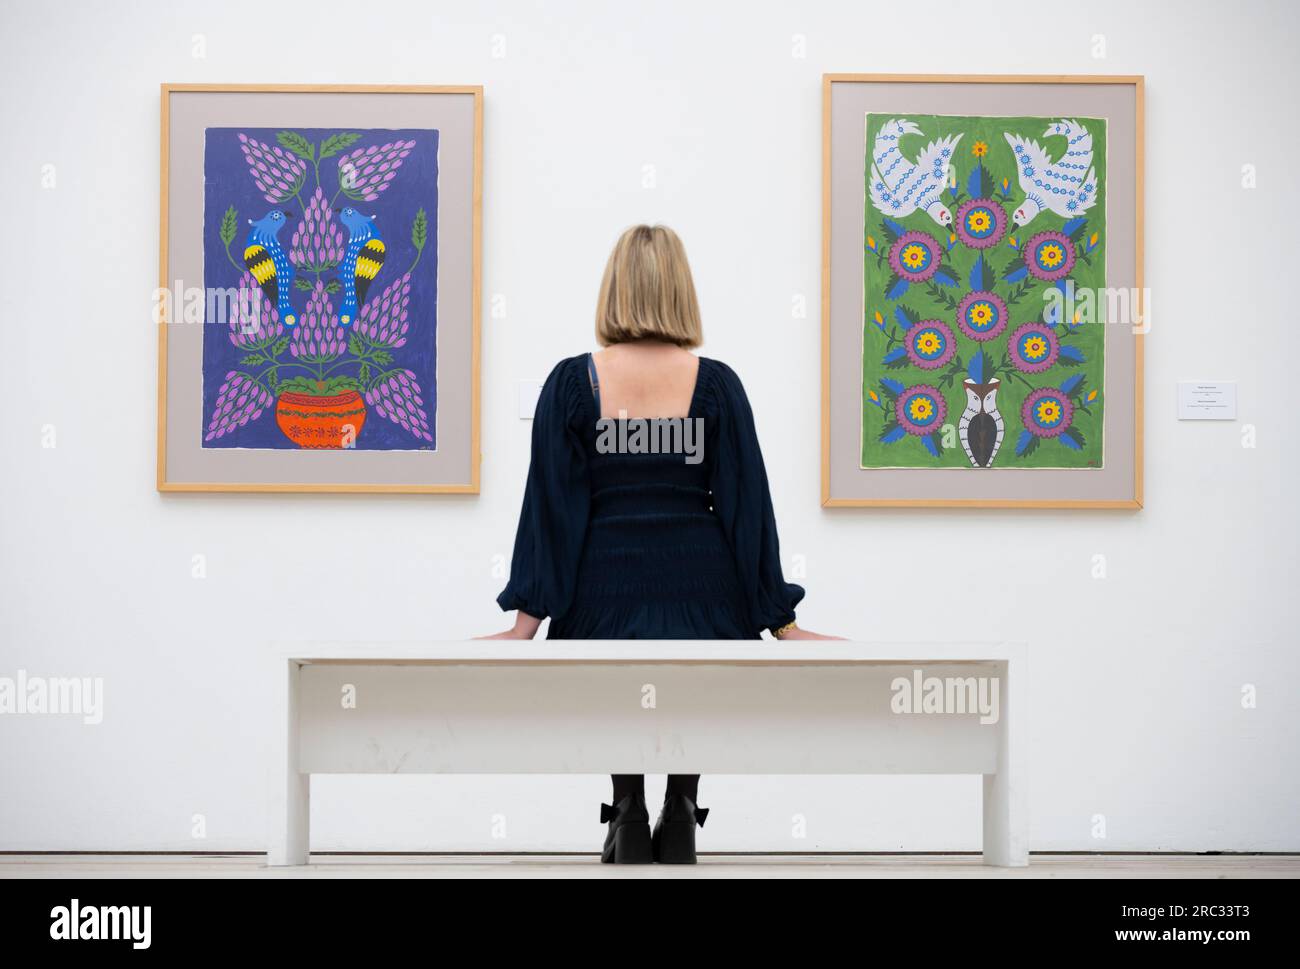 Saatchi Gallery, London, UK. 12th July, 2023. (13 July-31 August 2023). Exhibition of work by Ukrainian folk artist Maria Prymachenko (1908-1997), one of the country's best-loved artists. These works are shown in the UK for the first time, preserved by the artist's family for more than 50 years. The Ukrainian museum where many of Prymachenko's artworks were previously held was destroyed when Russian forces occupied the local village. Image: Flowers with Birds. Credit: Malcolm Park/Alamy Live News Stock Photo